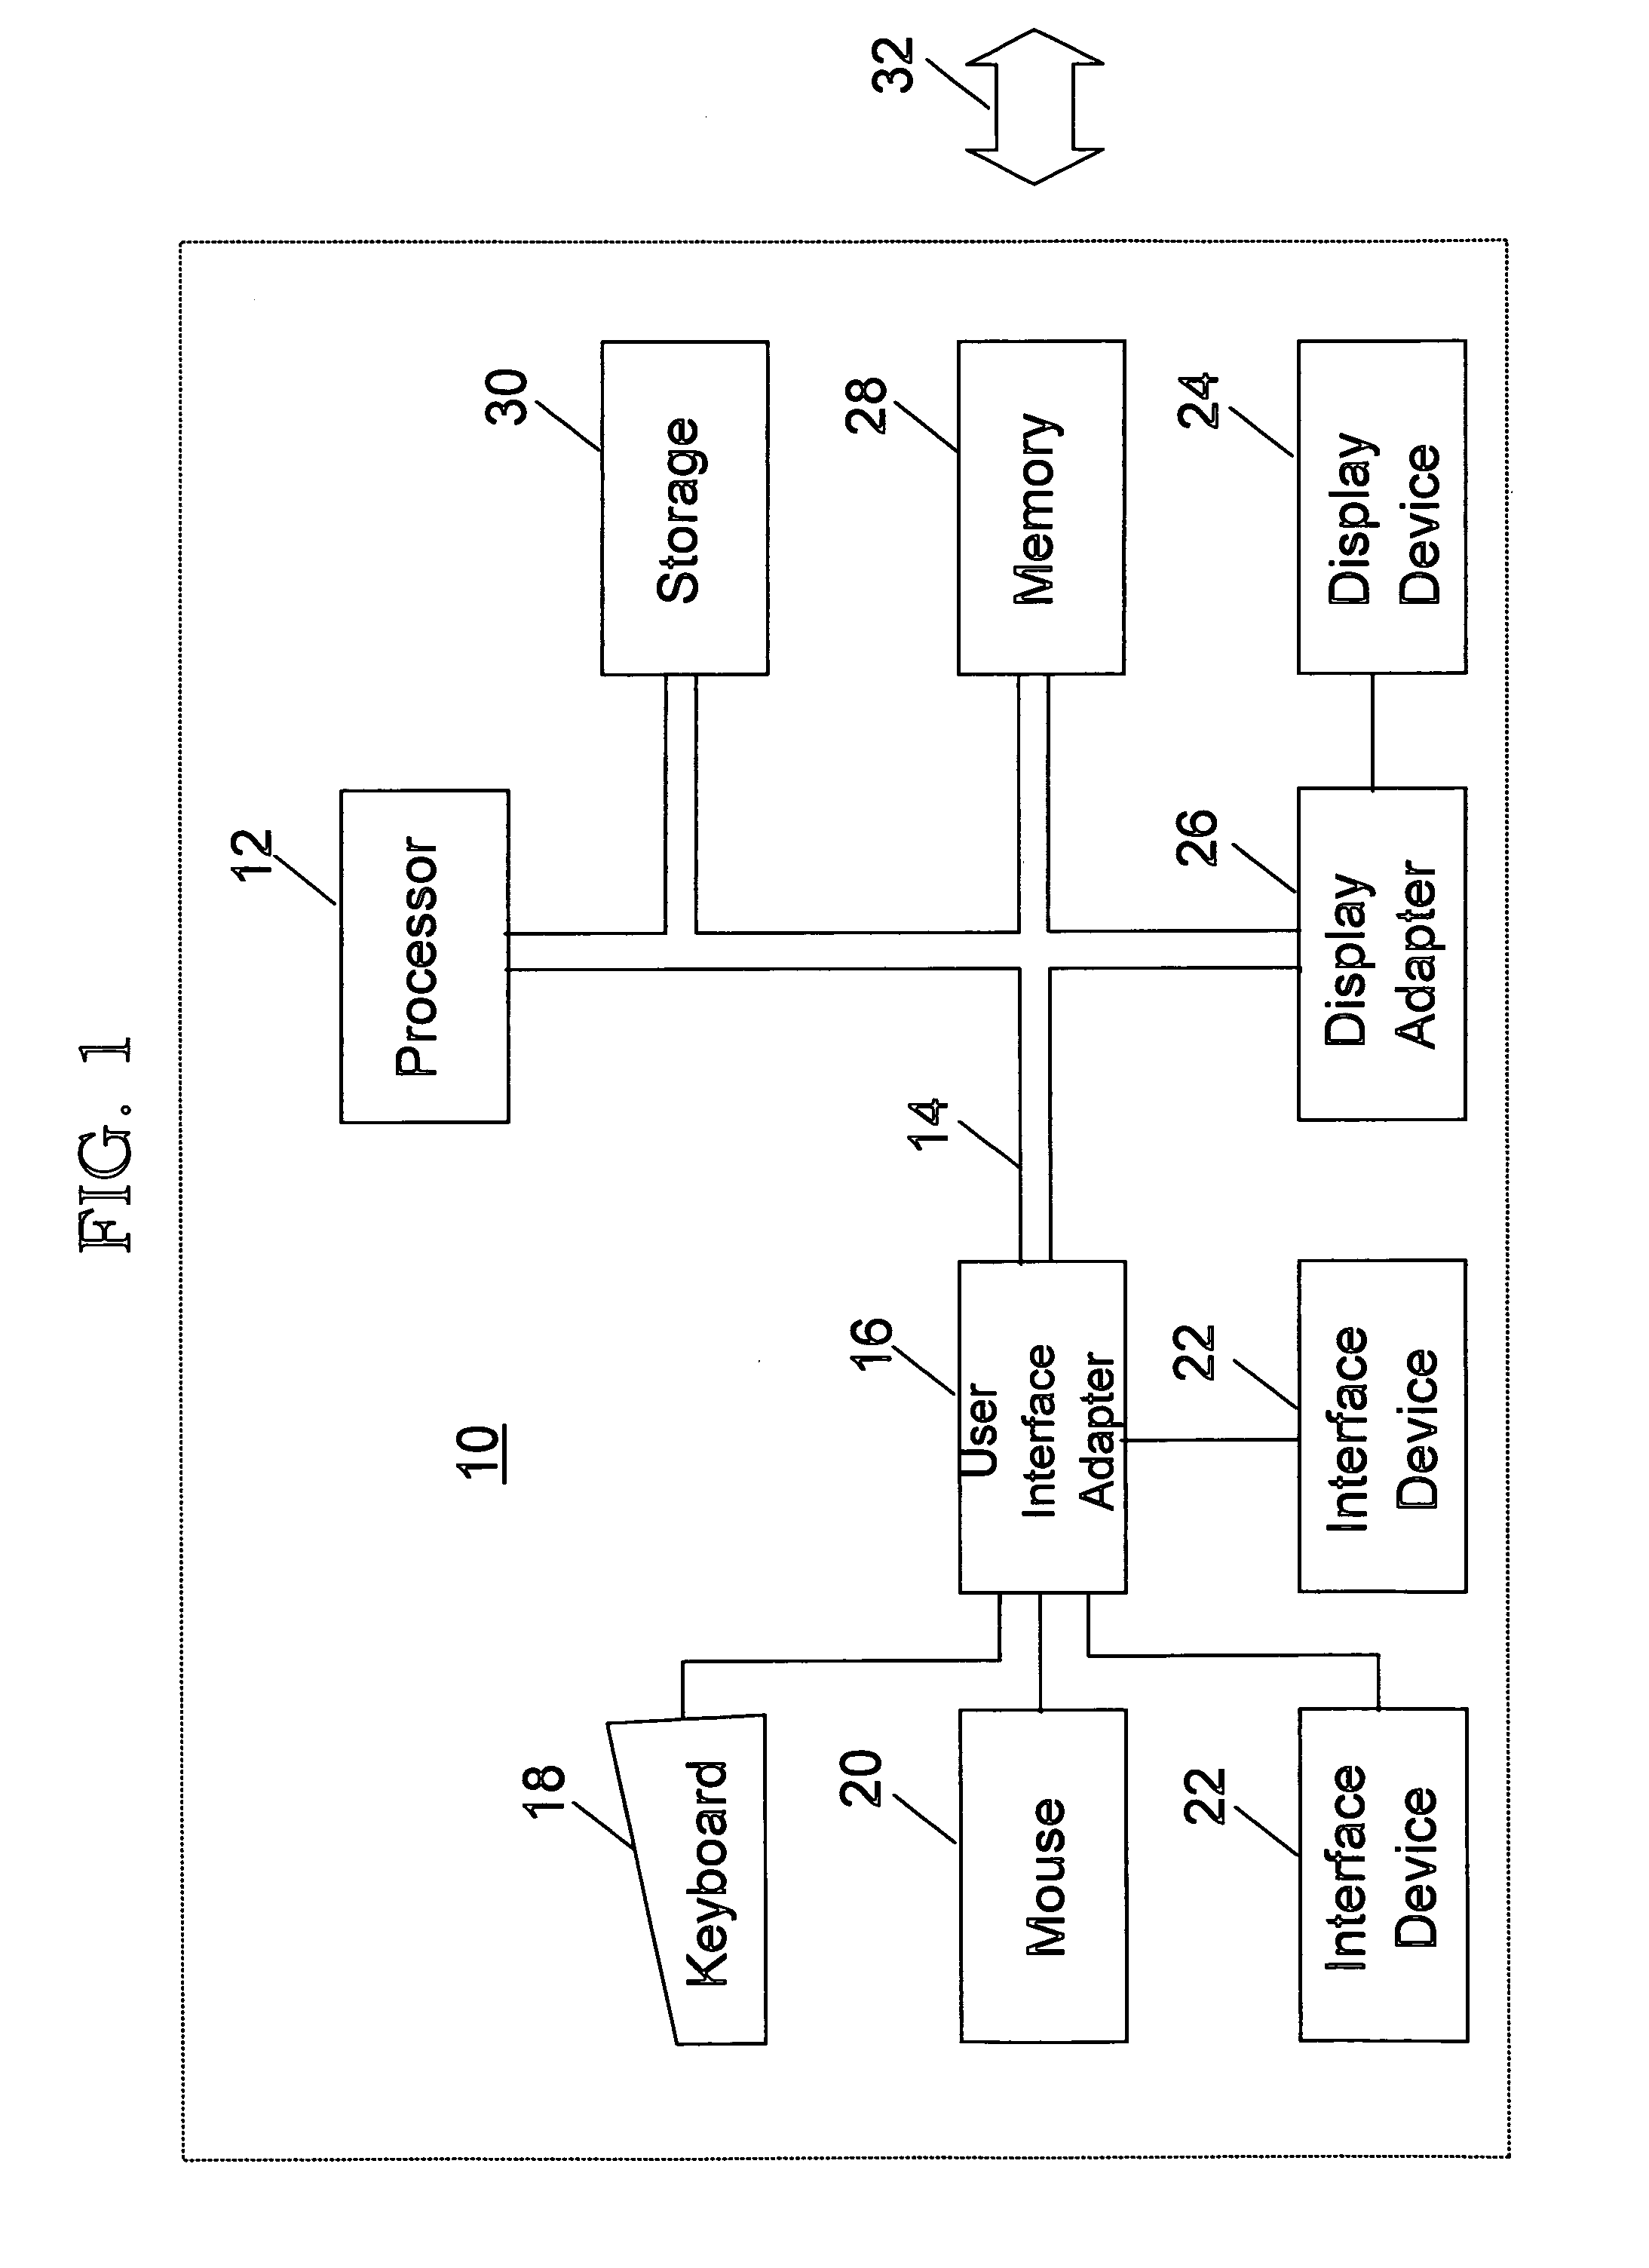 Cache management method and system for storing dynamic contents